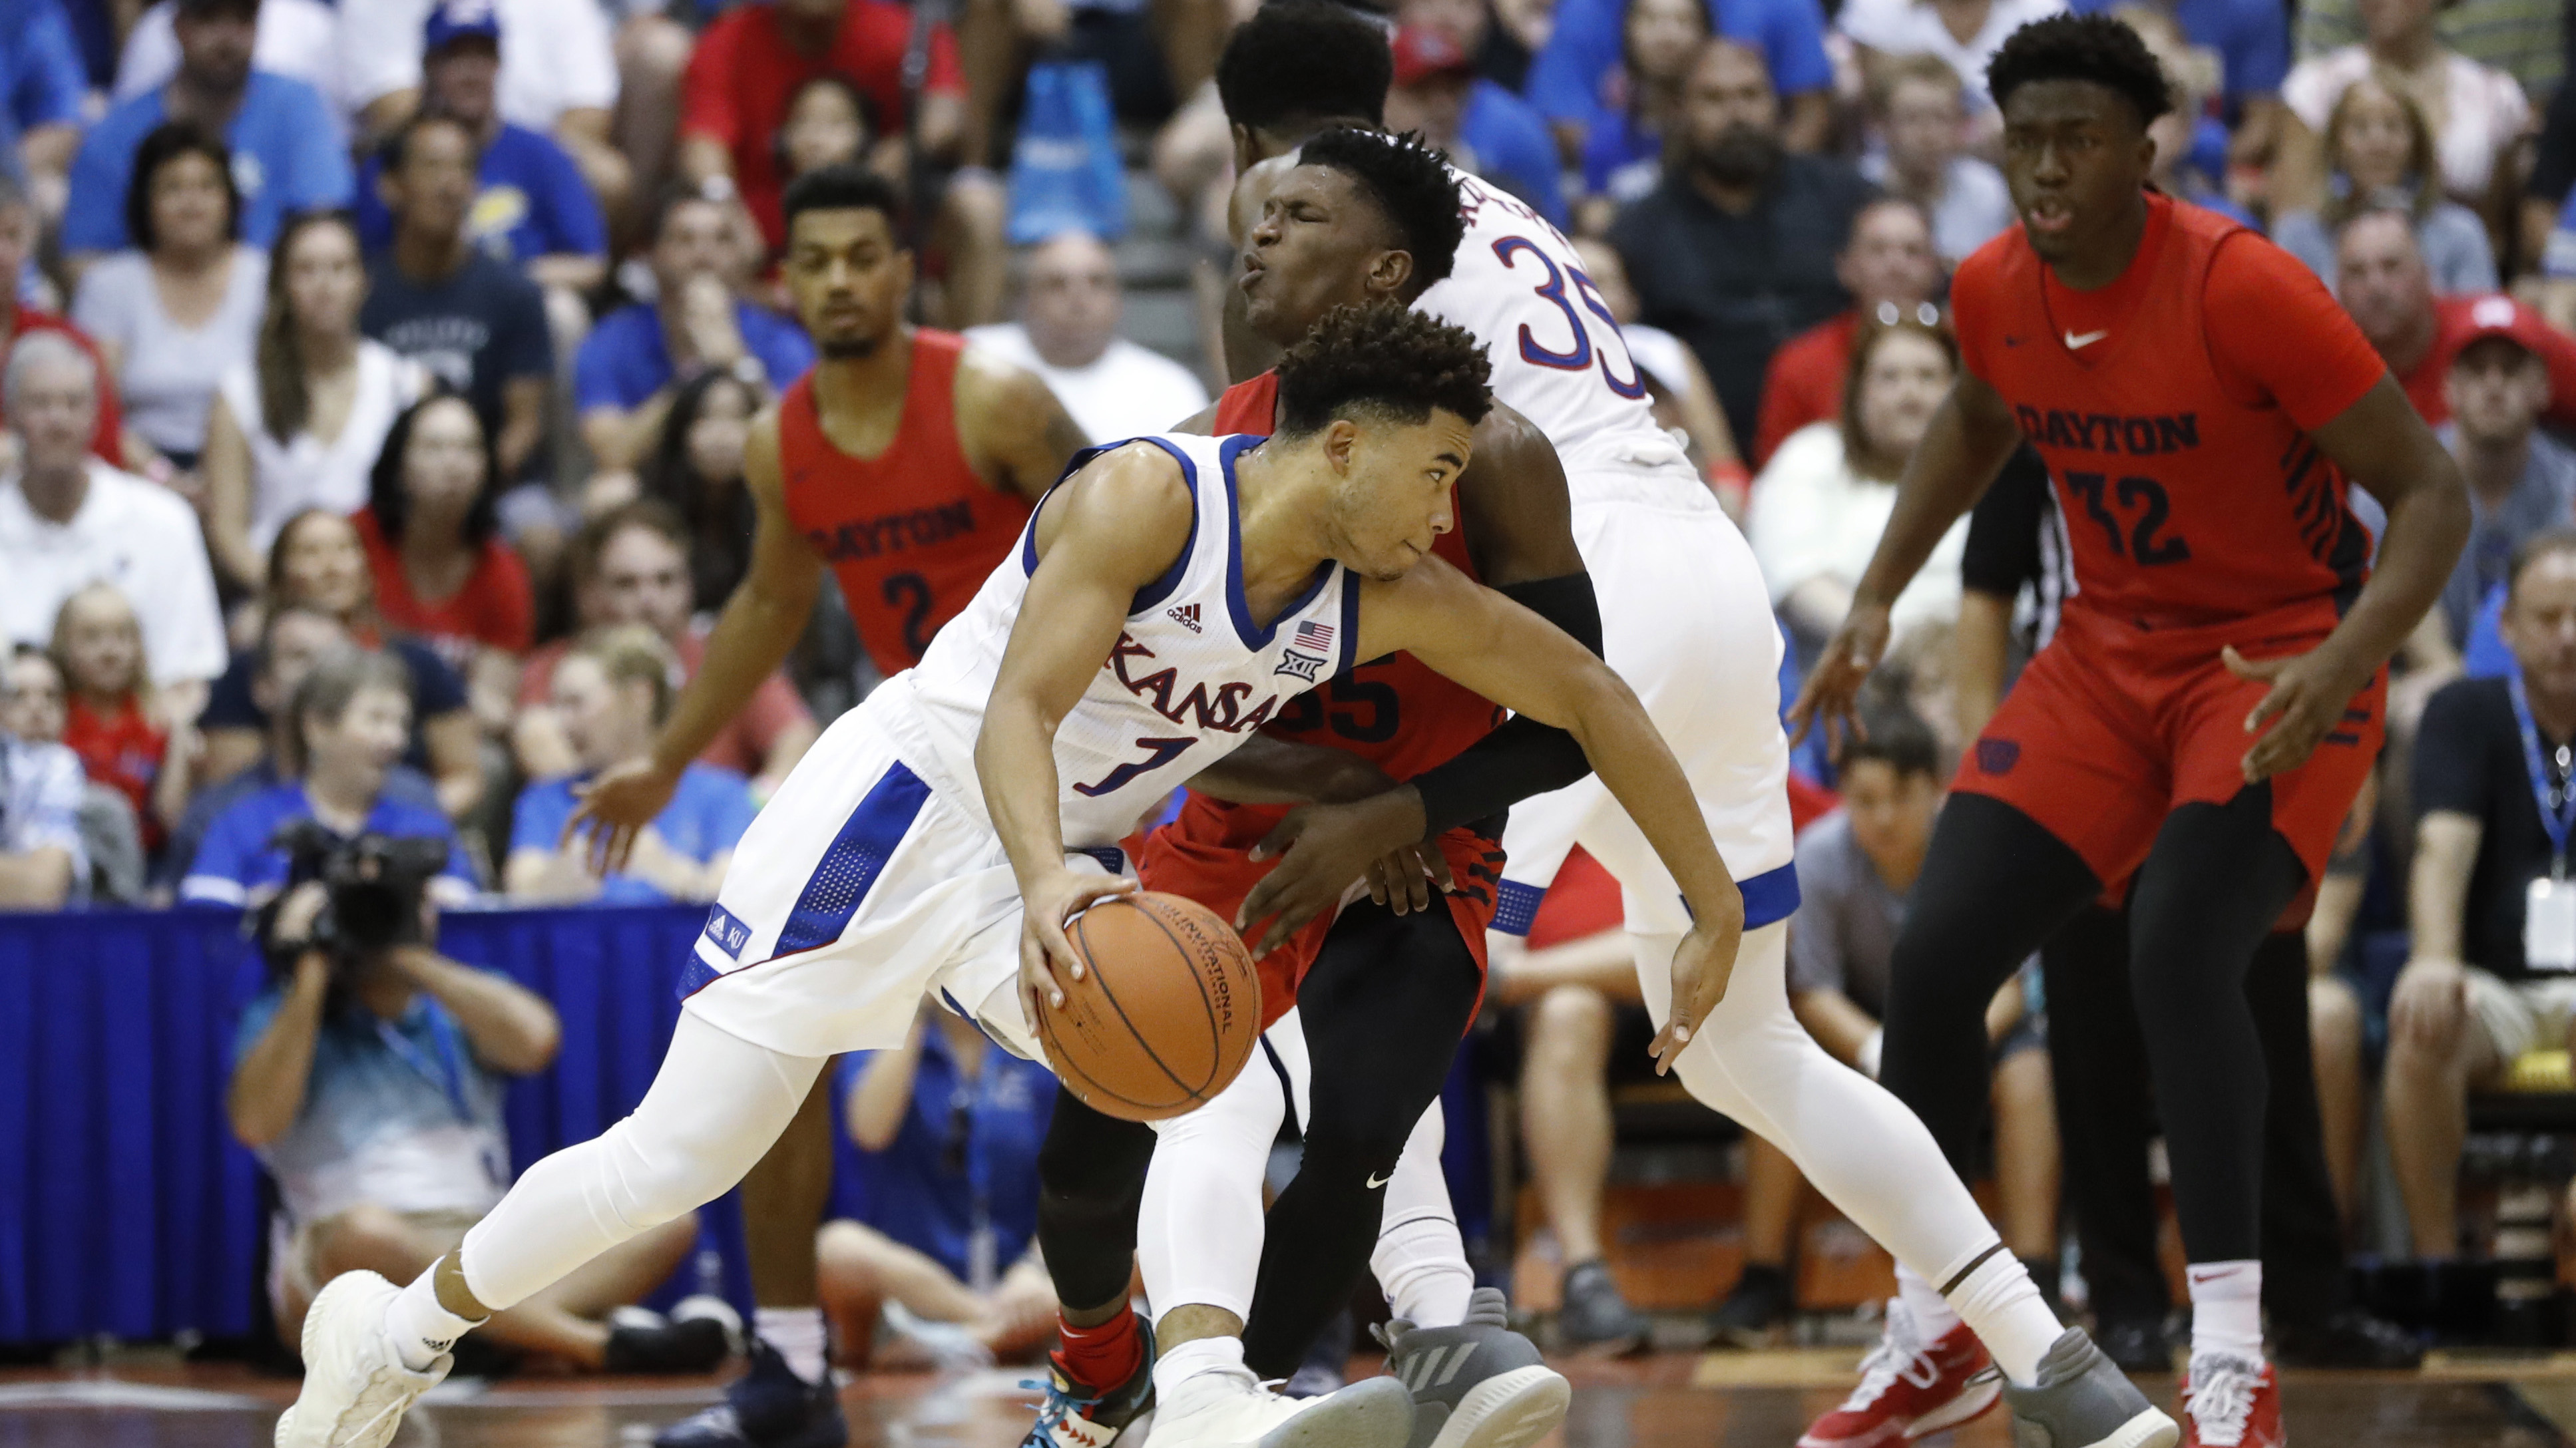 Kansas hangs on in overtime, wins Maui Invitational with 90-84 victory over Dayton